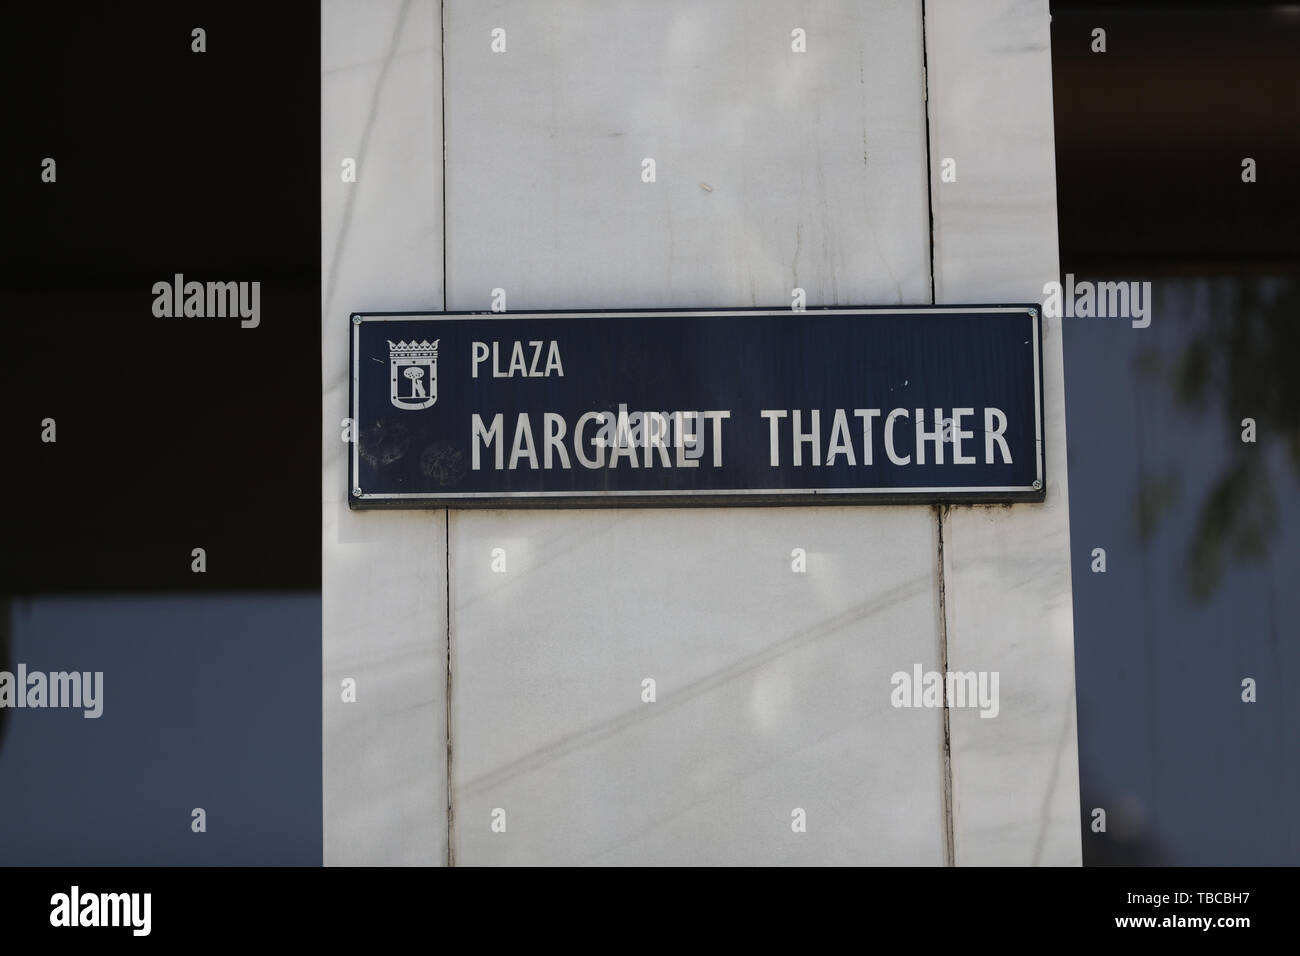 A street sign of Margaret Thatcher square in Madrid, which has been renamed by Liverpool fans as 'Jeremy Corbyn square' ahead of the Champions League Final at the Wanda Metropolitano stadium on Saturday night. Stock Photo